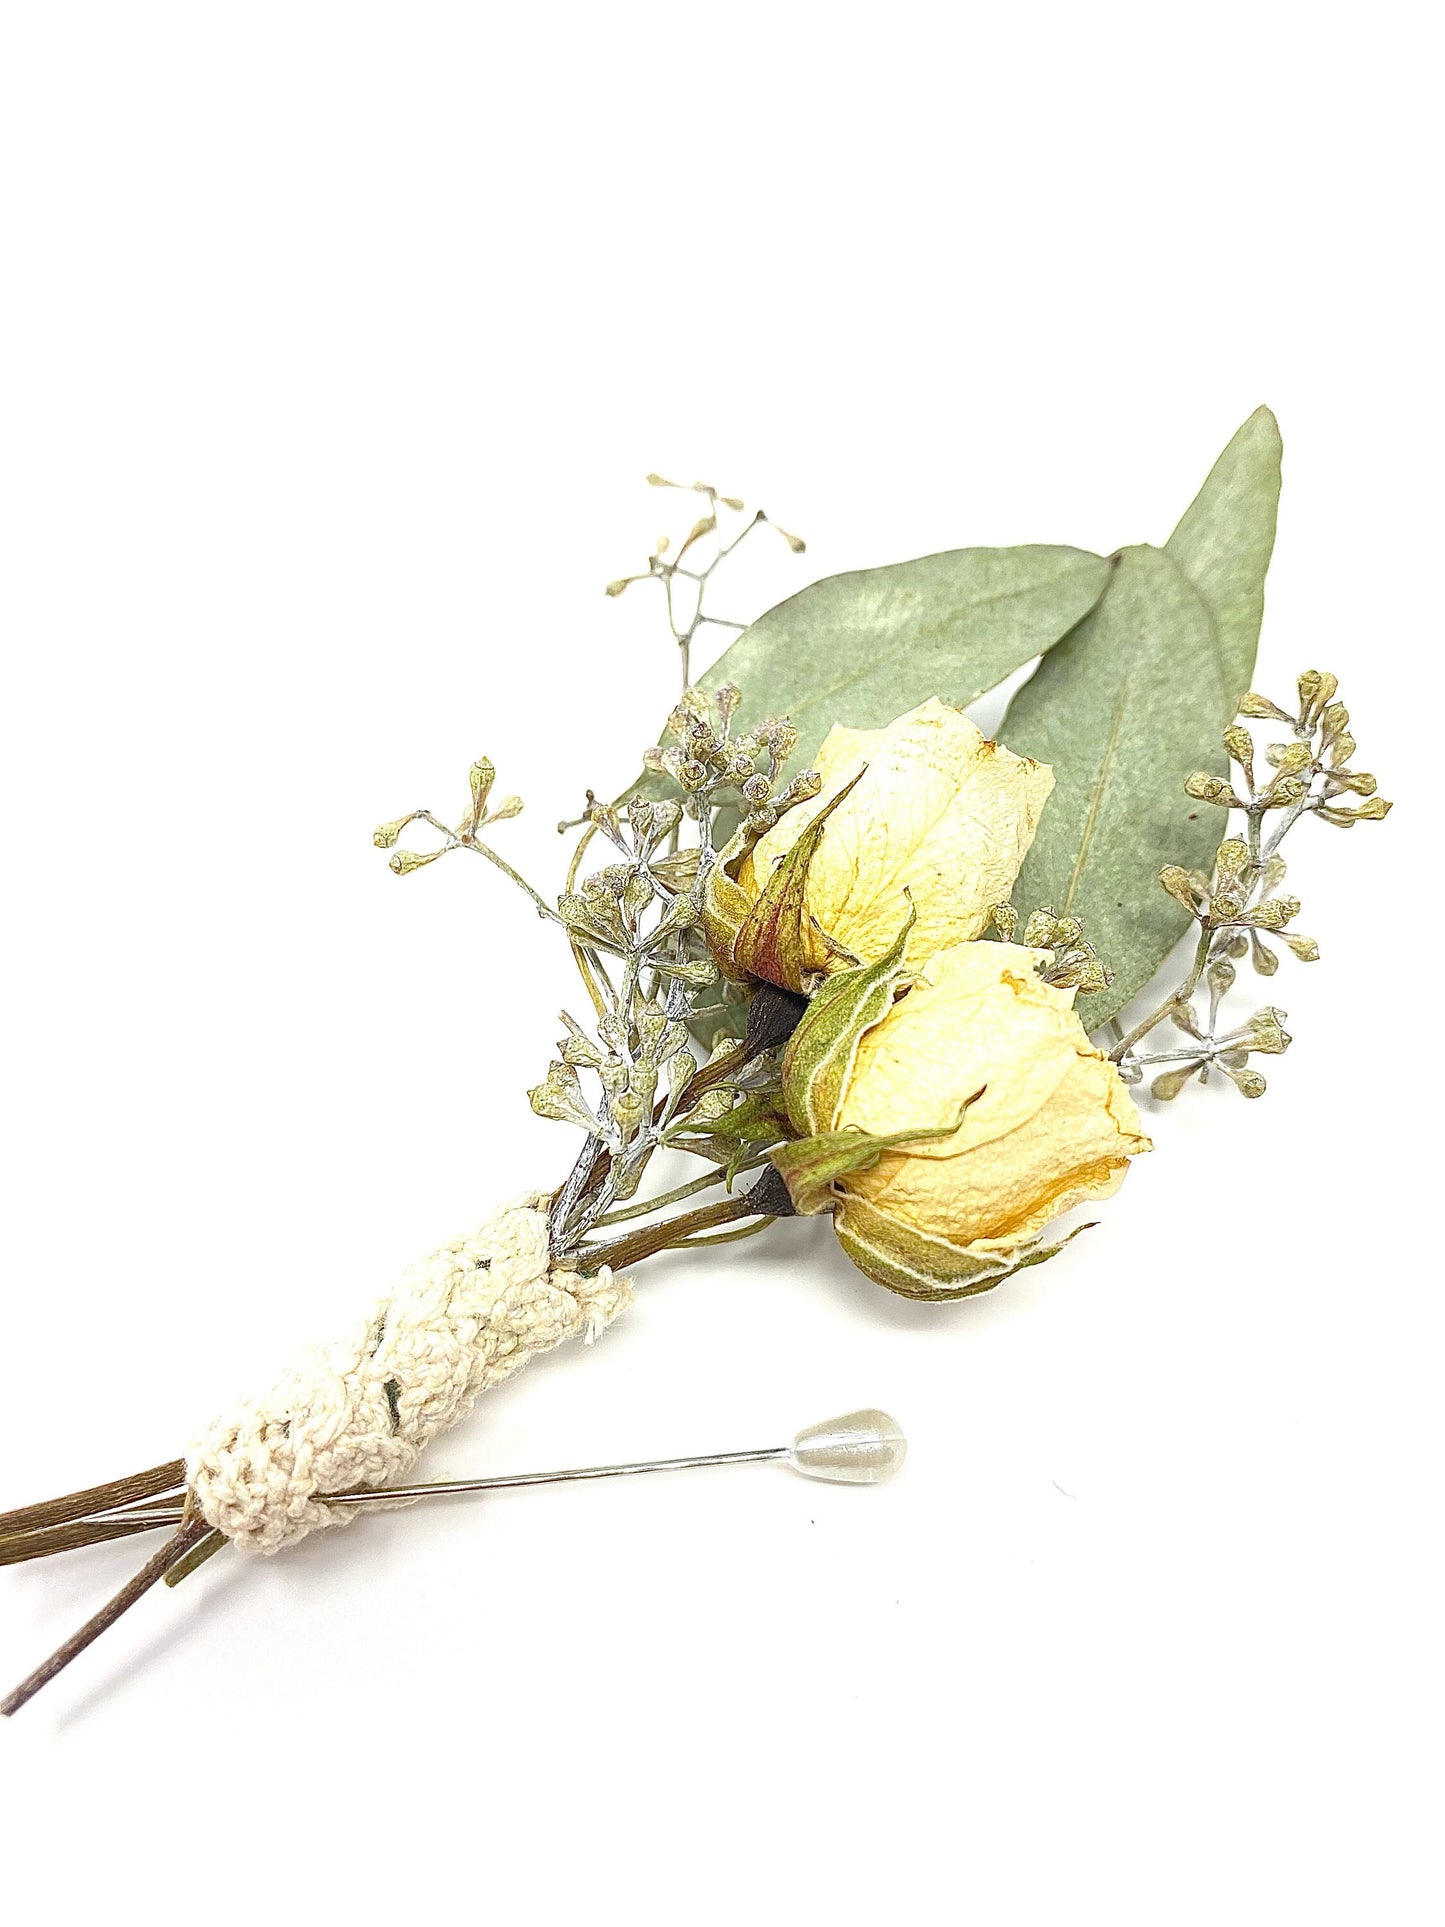 Wedding Boutonniere, Dried Roses, Wedding Accessory, Bridal, Simple, Dried Flowers, Neutral, White and Green, Decor, Dried Boutonneire